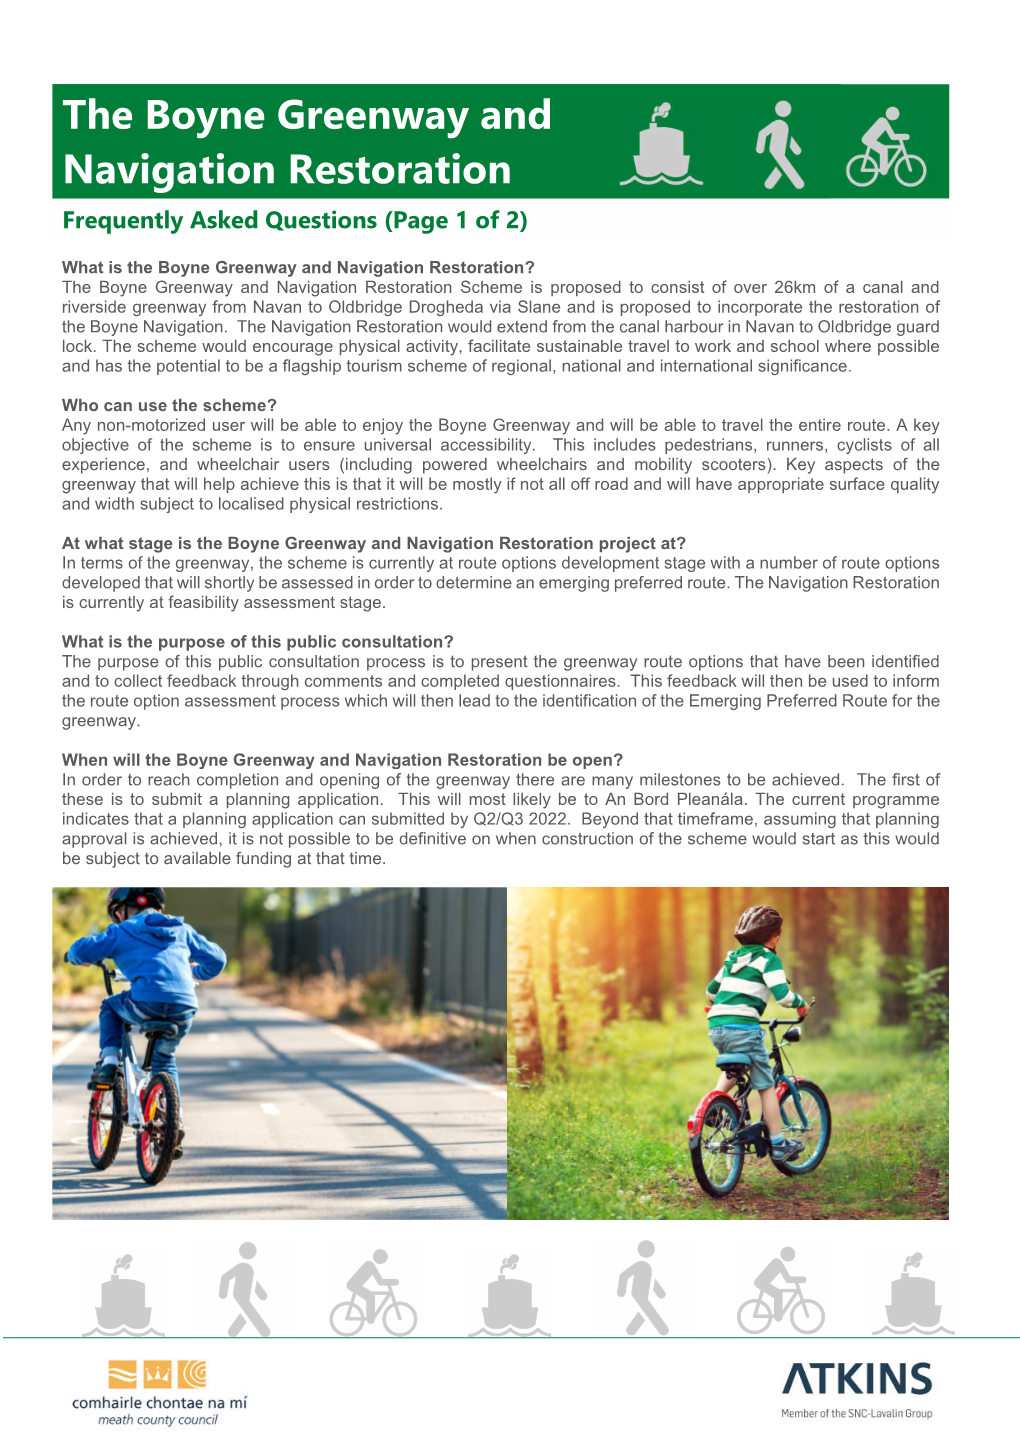 The Boyne Greenway and Navigation Restoration Frequently Asked Questions (Page 1 of 2)